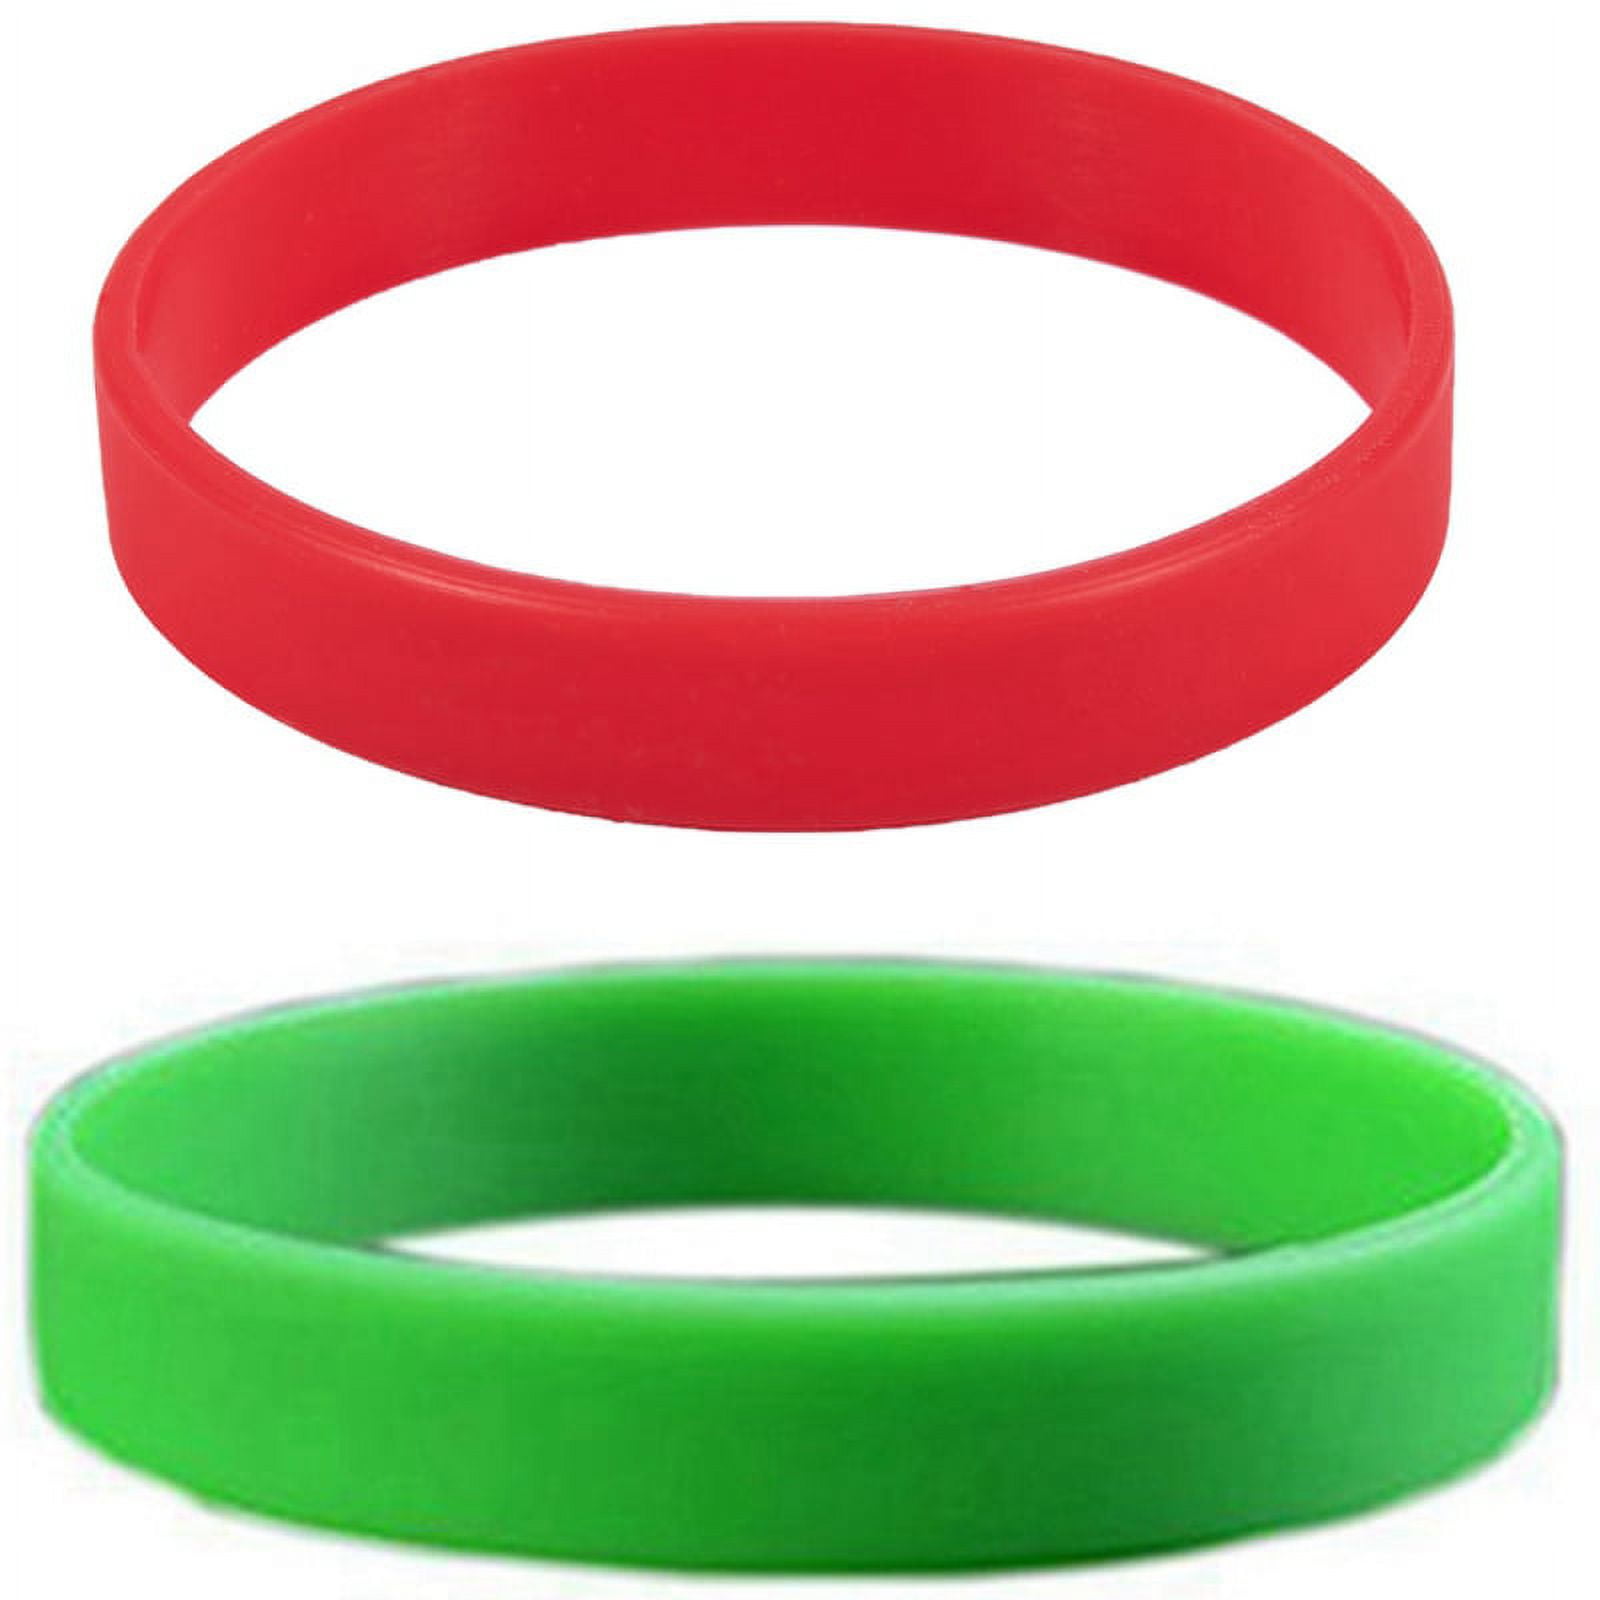 10 Dozen Silicone Wristbands, Adult-size Rubber Bracelets, Great For  Event-Red